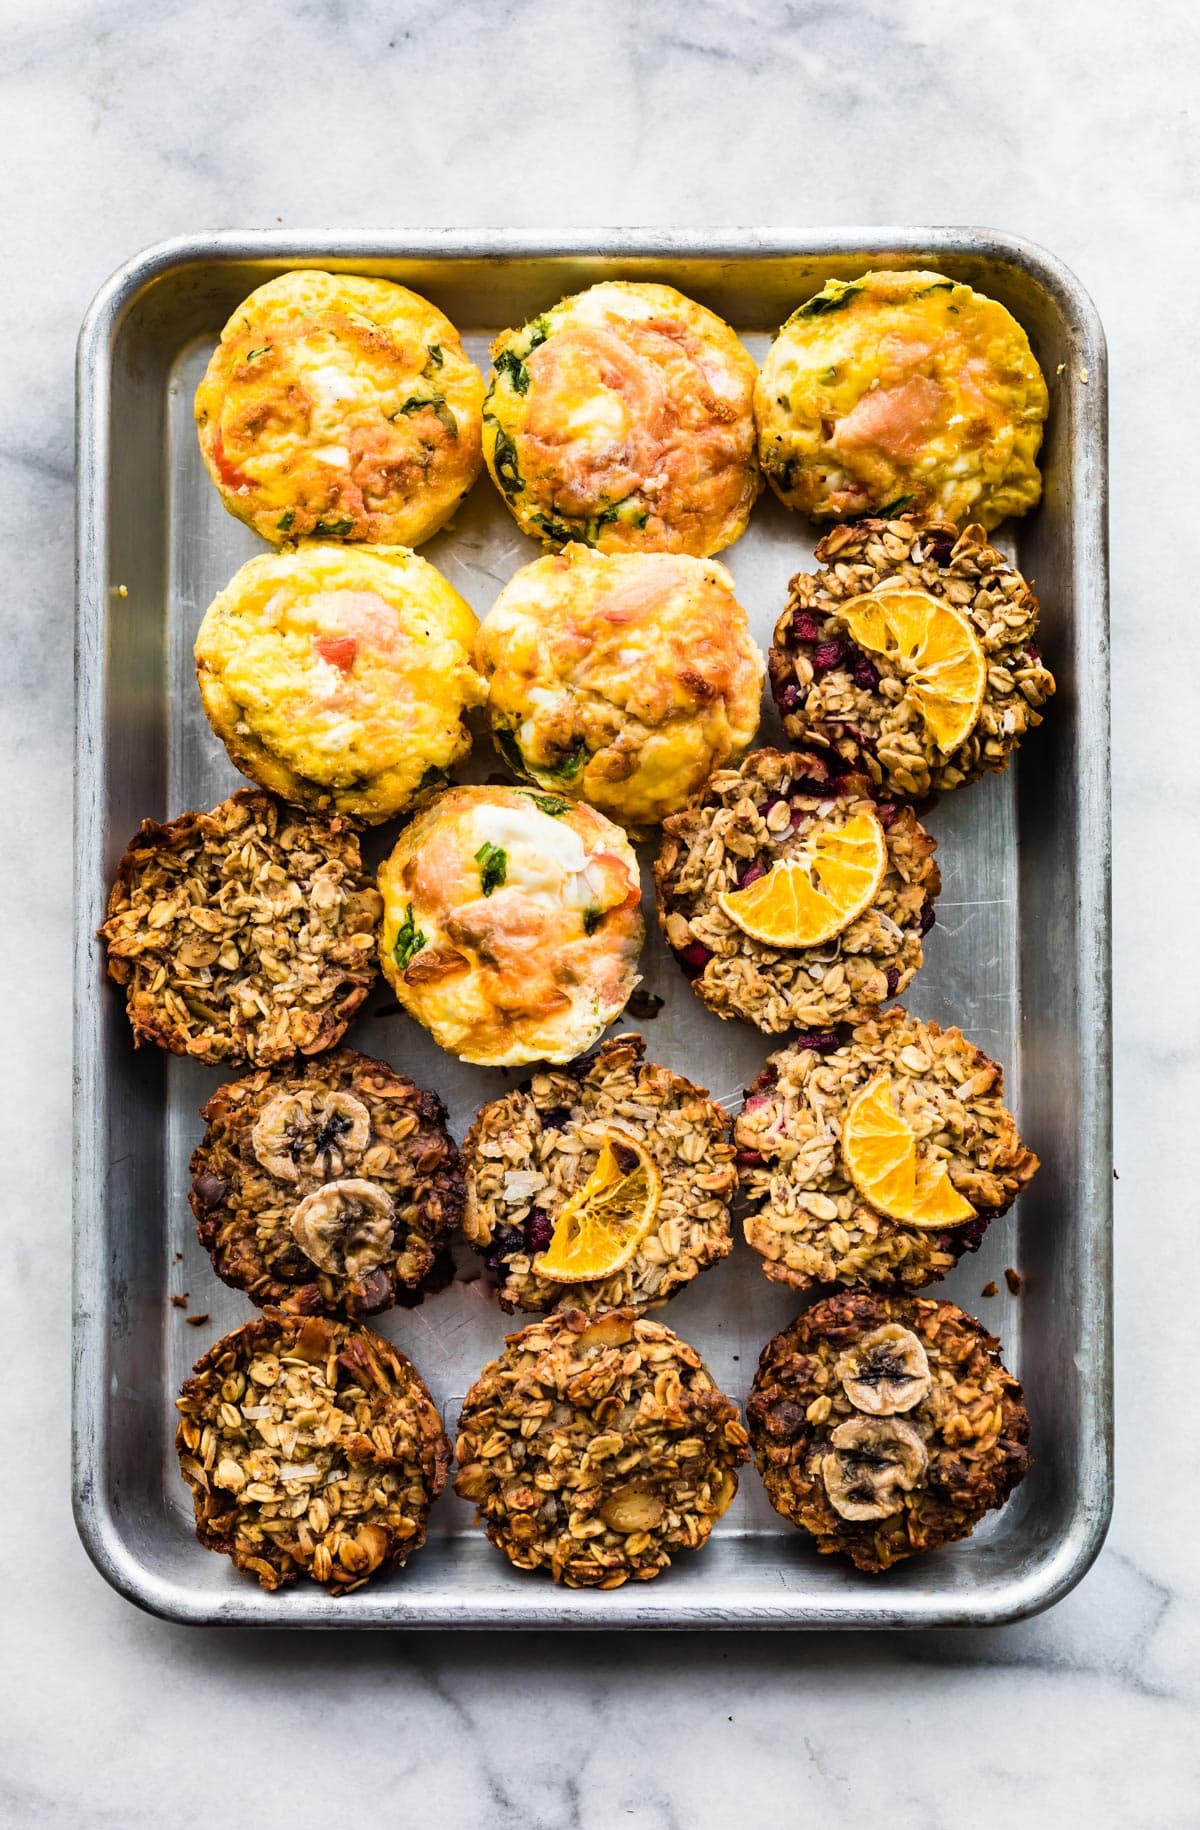 Overhead shot of frittata muffins and oatmeal cups on a sheet pan.